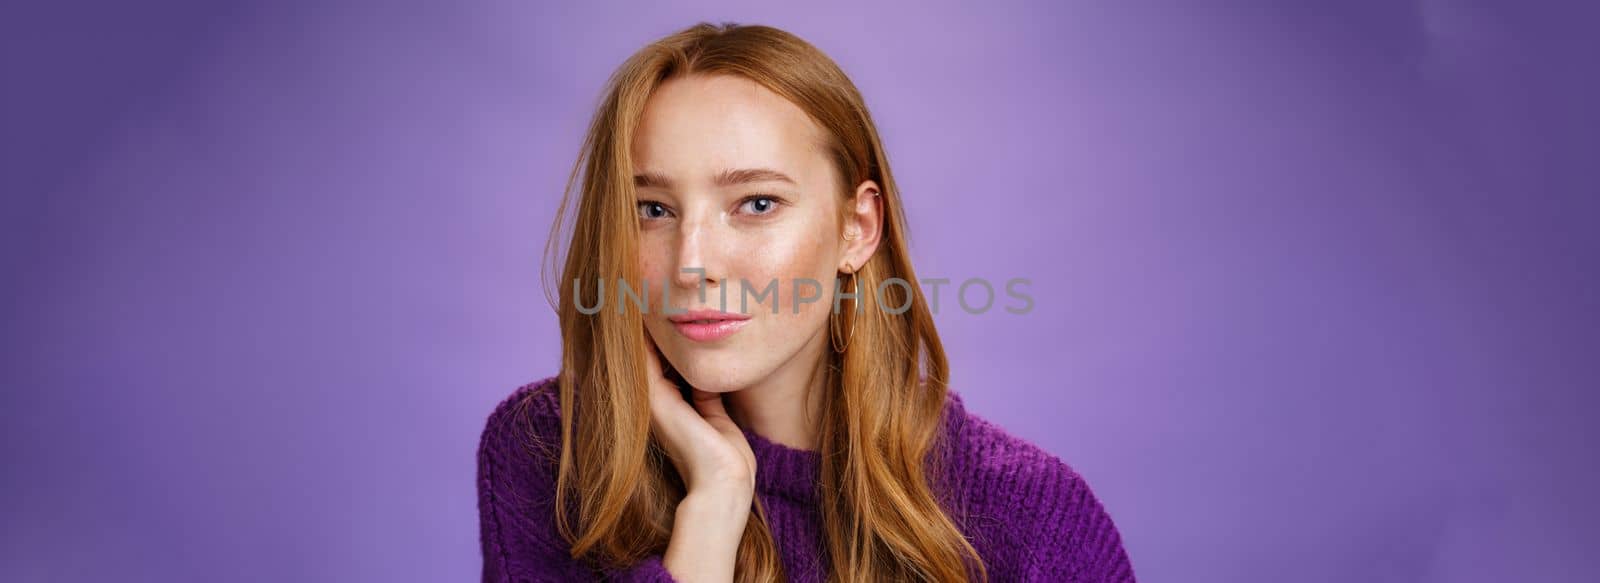 Sensual and romantic woman with red hair and freckles touching cheek gently as curls dropping on half face gazing charmed and flirty at camera, smiling being tender and coquettish over purple wall.